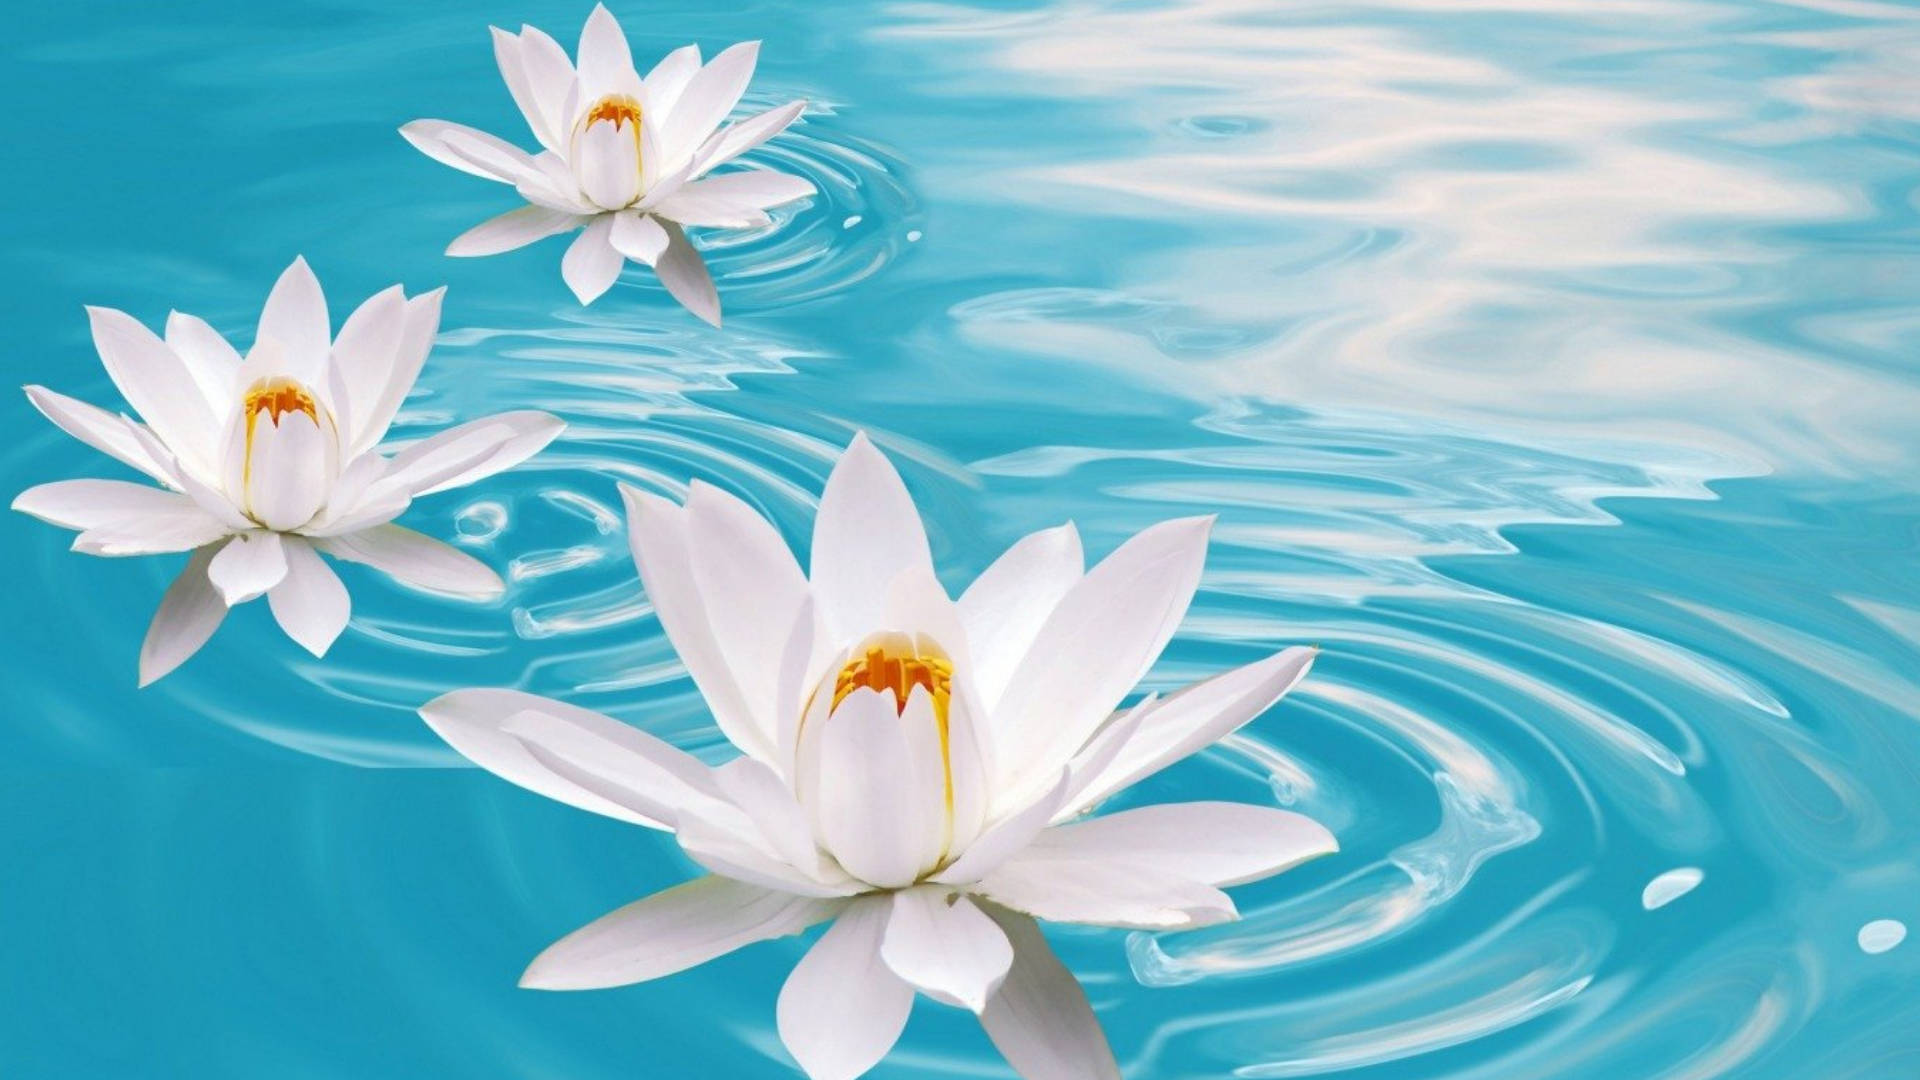 Lotus Flower Live Wallpaper:Amazon.com:Appstore for Android